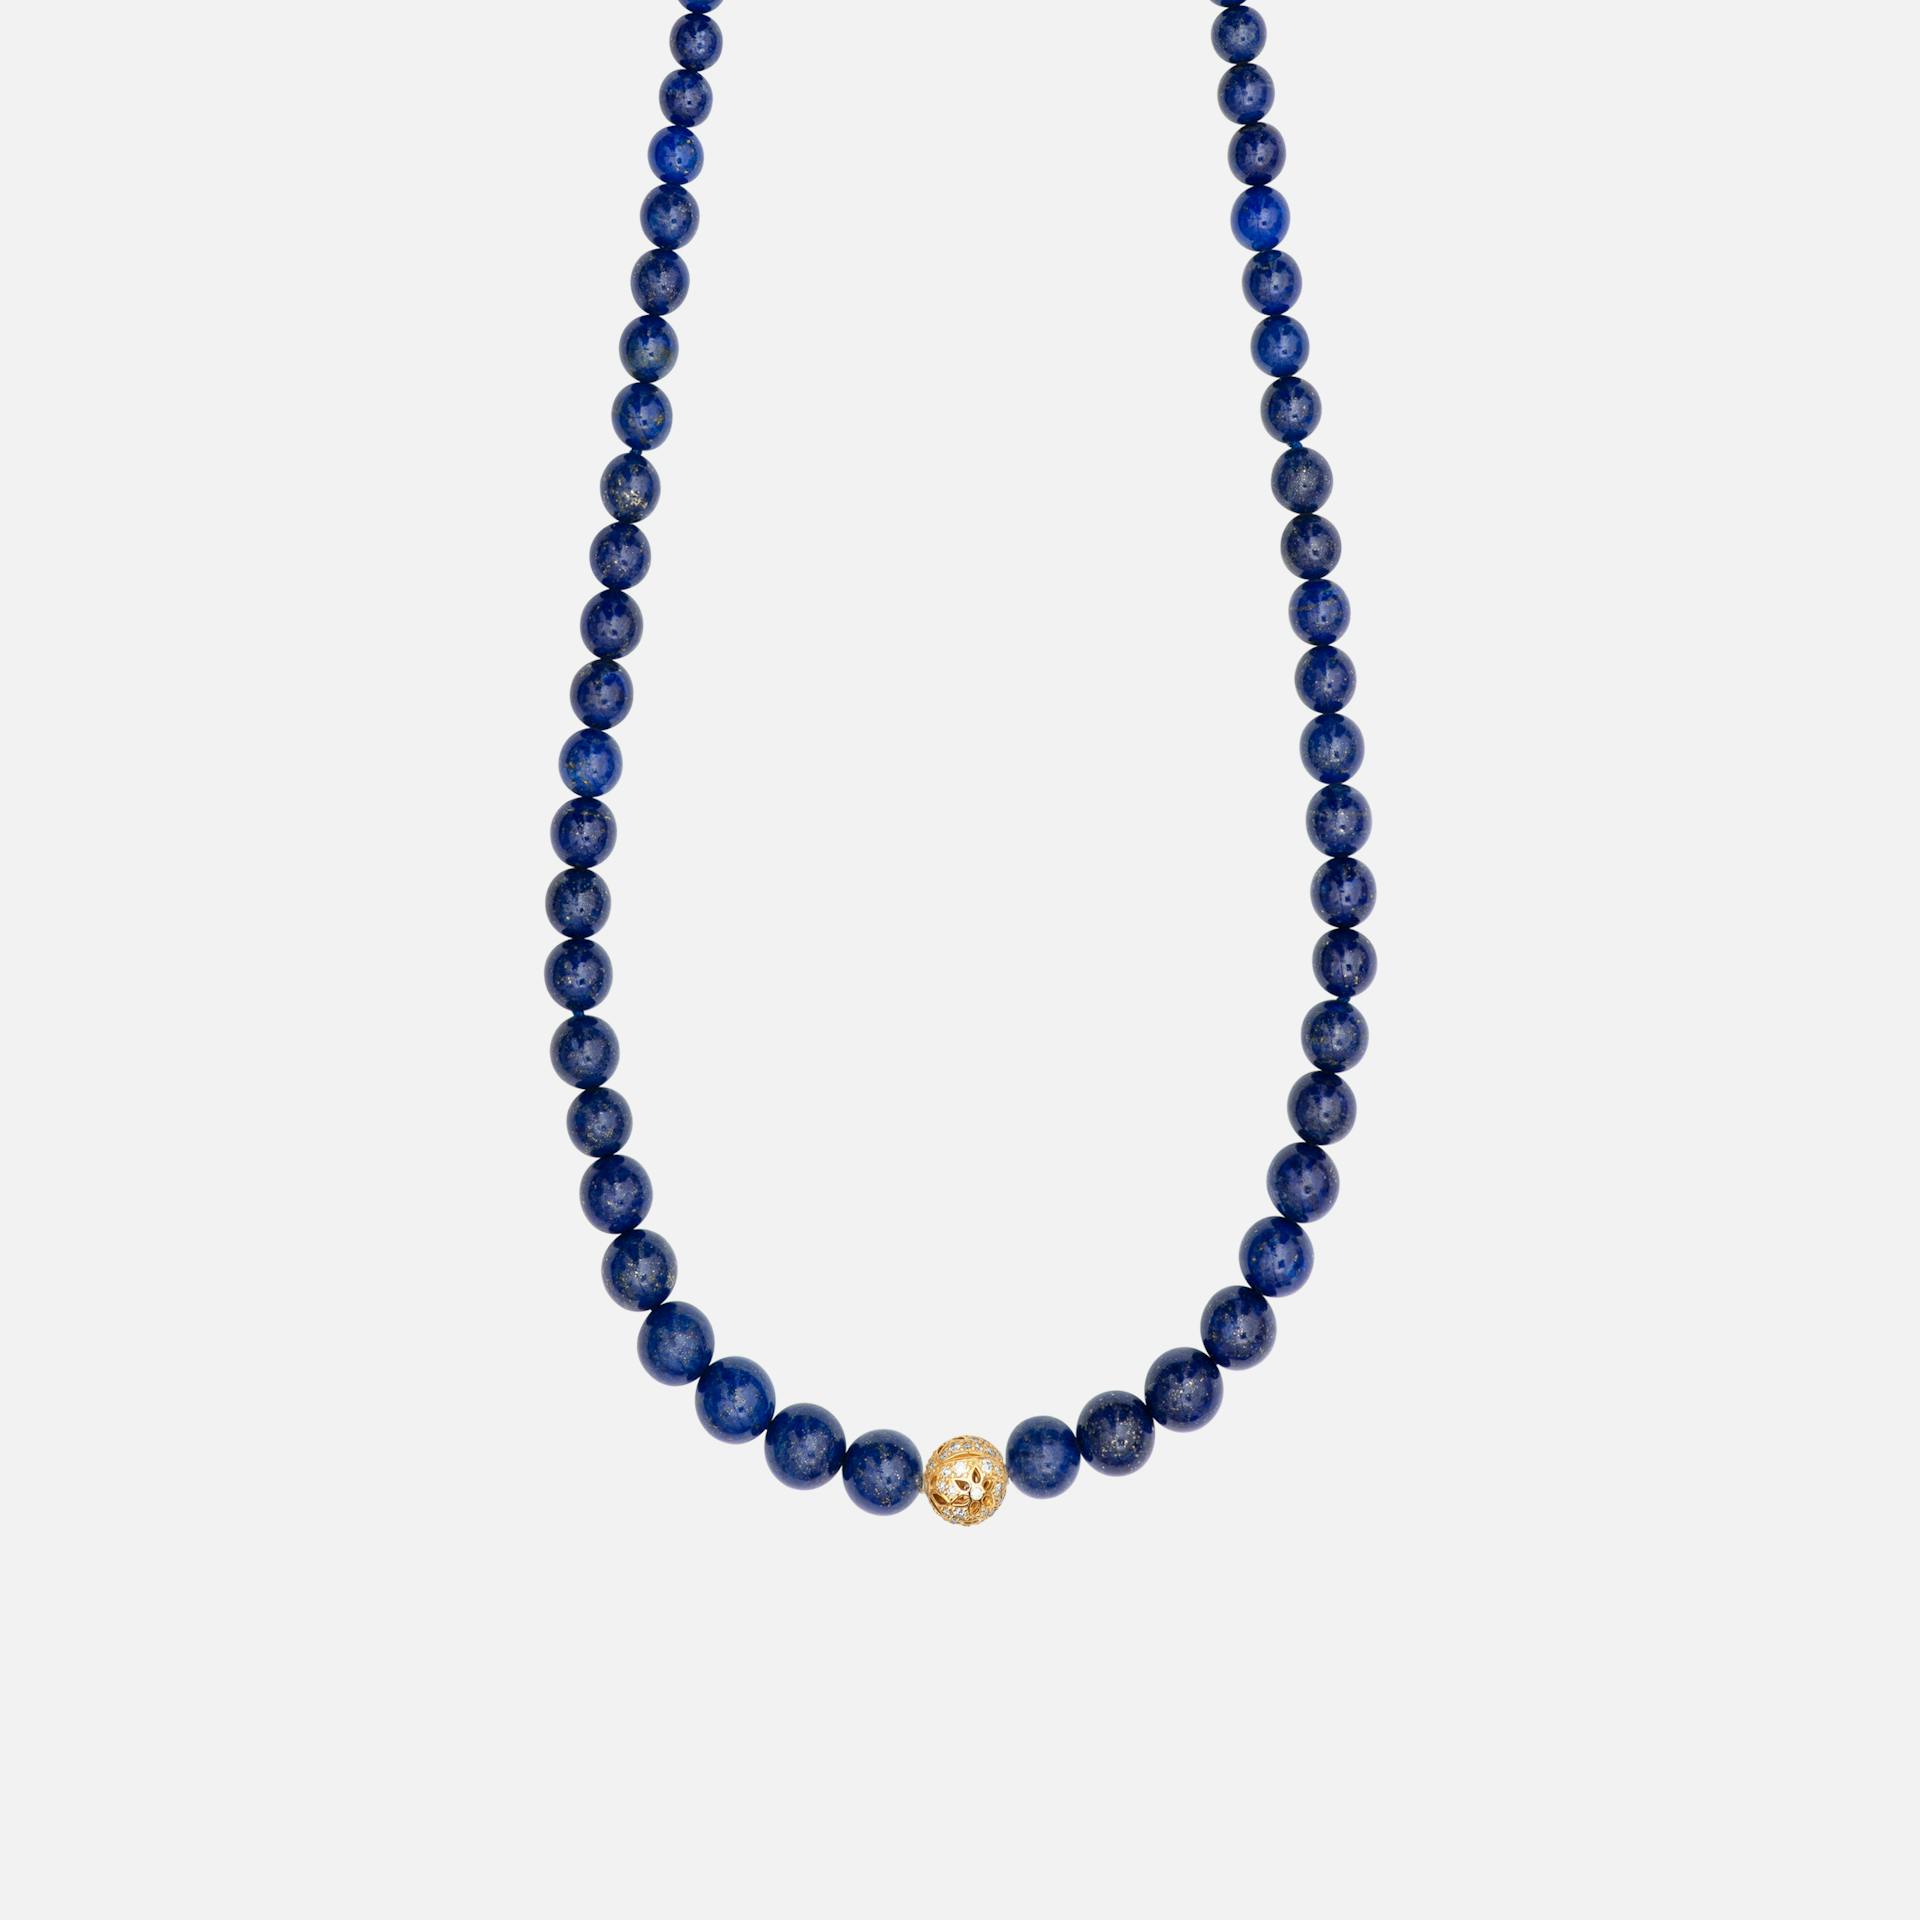 Bead collier without lock Lapis lazuli and evil eye with 18k gold setting